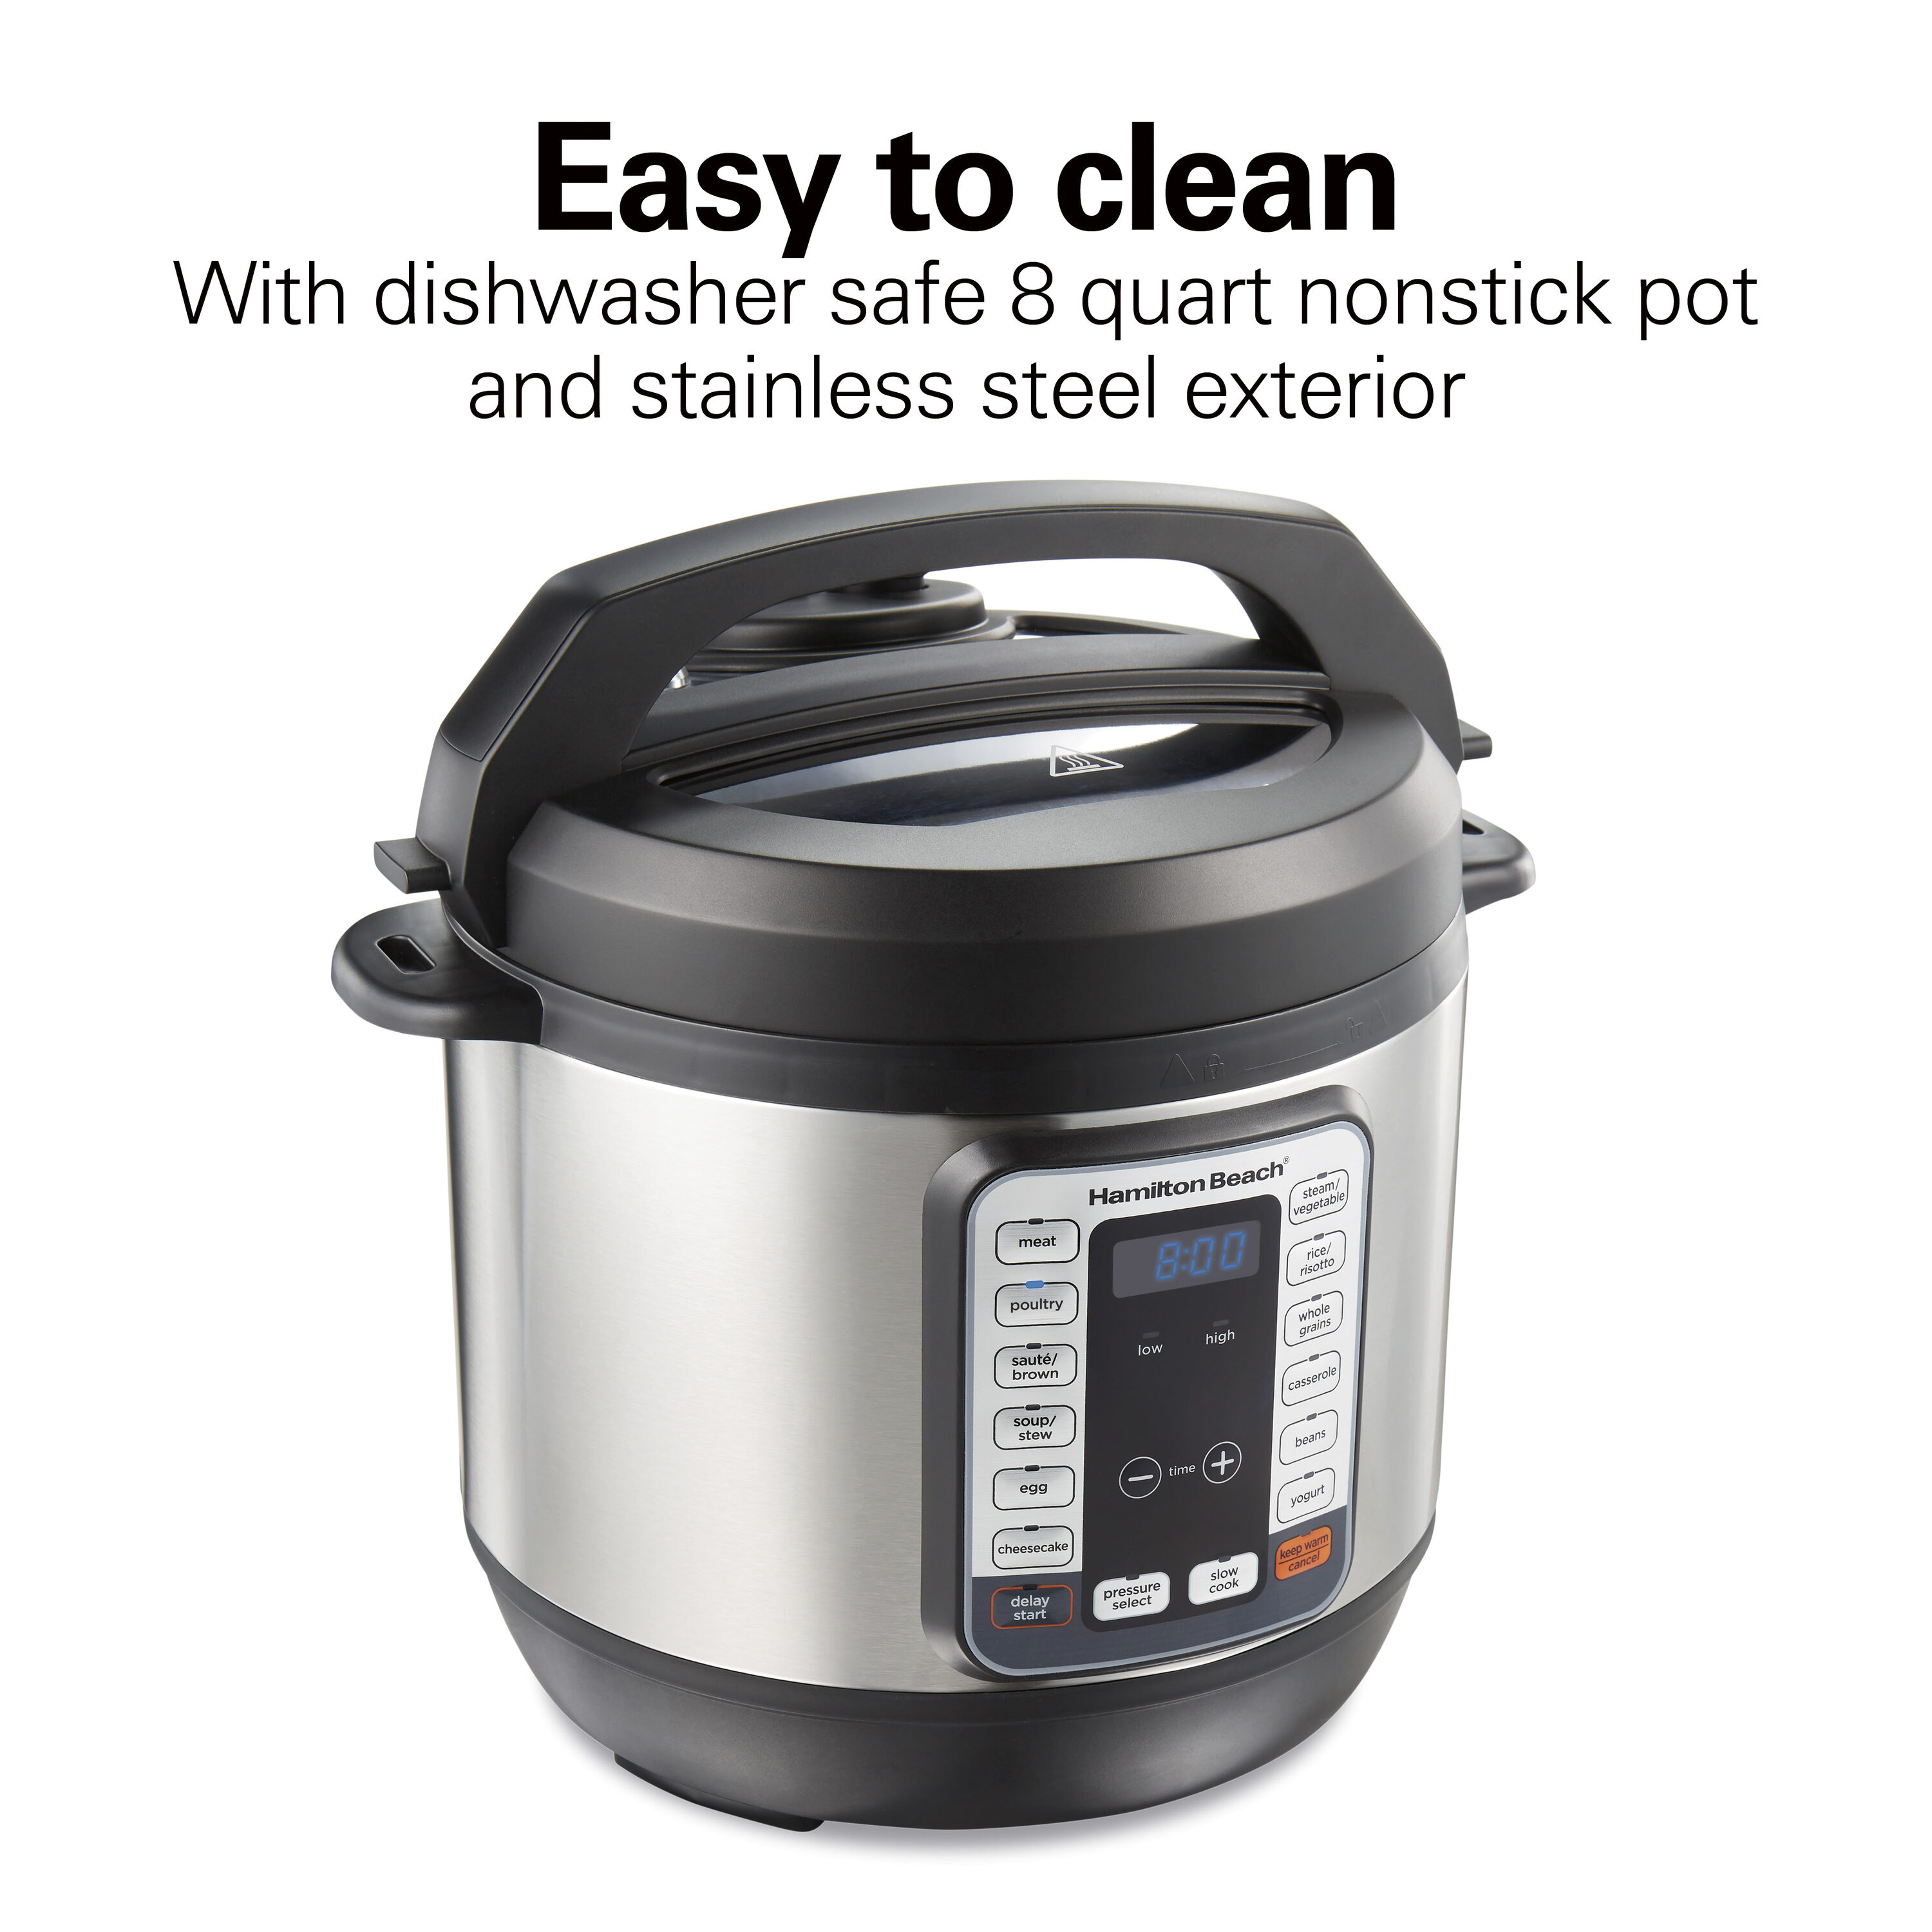 KENMORE 7 qt. Black and Stainless Steel Programmable Slow Cooker with  Dipper Sauce-Warmer KKSC7QSS - The Home Depot